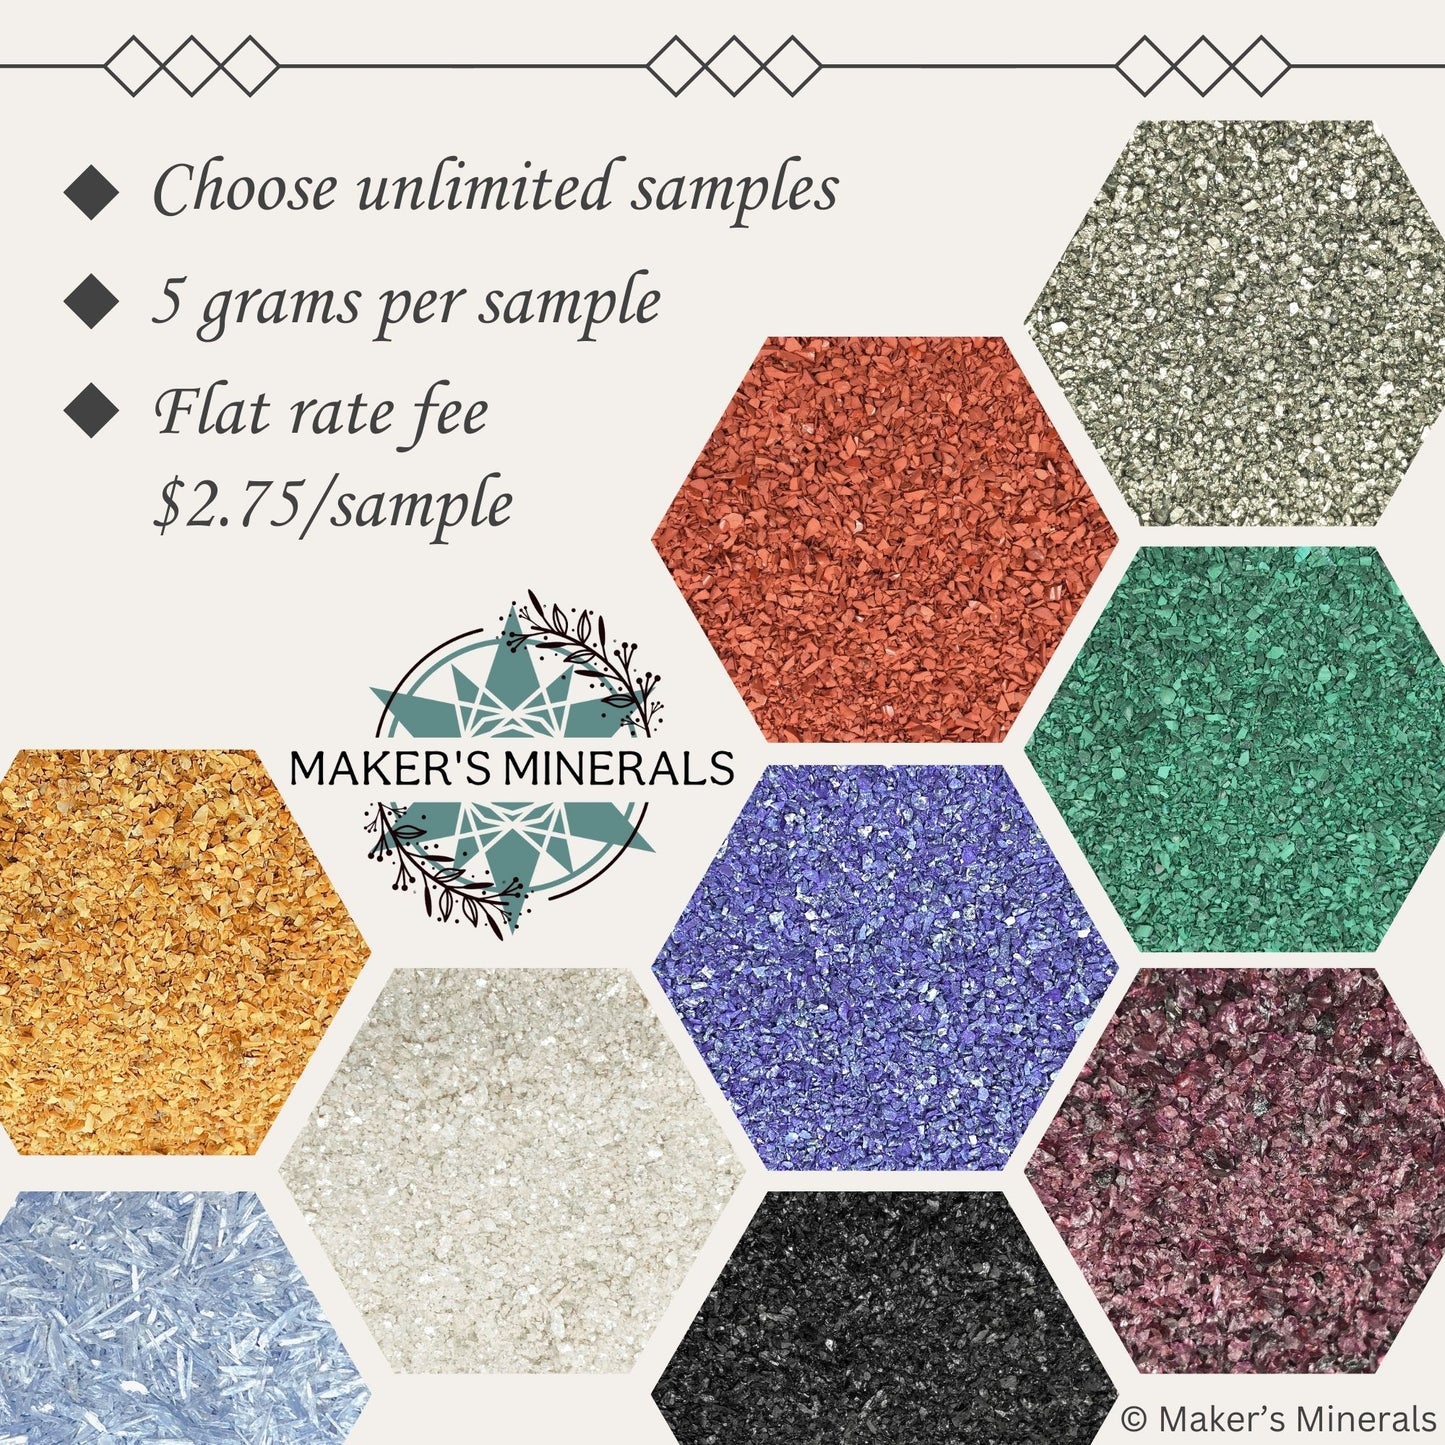 Crushed Mineral and Gemstone Sample, 5 grams, Sand Size (2mm-0.25 mm)